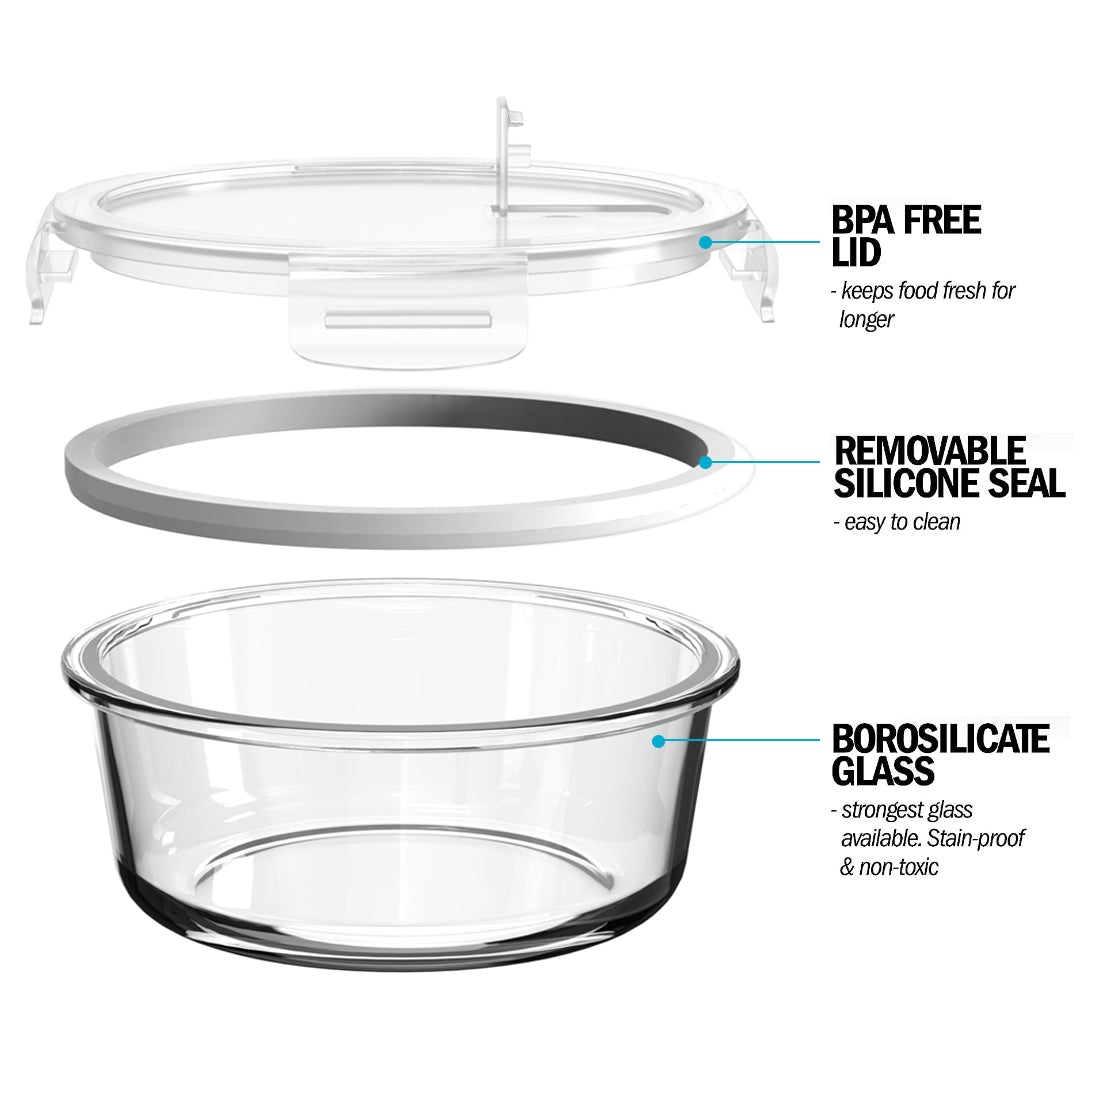 ROUND Glass Containers with steam vent lid - 5 Pack